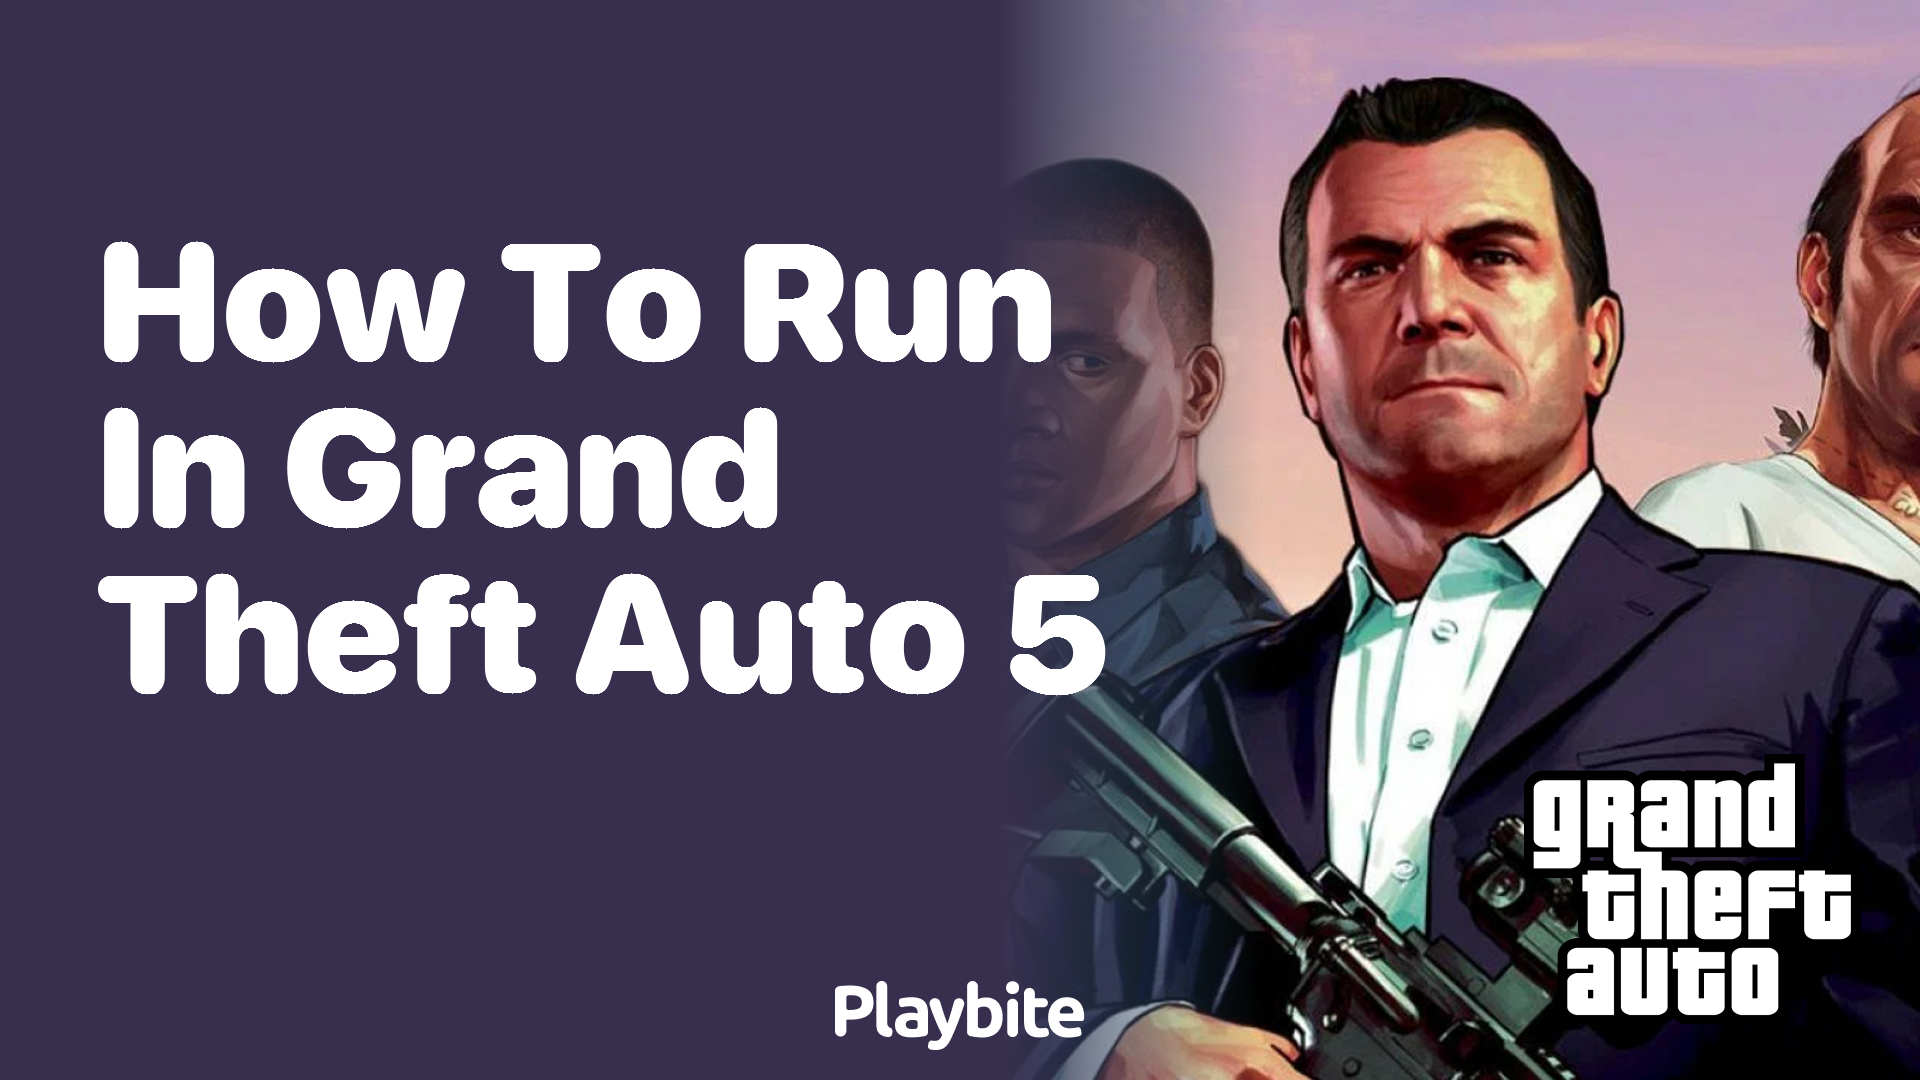 How to run in Grand Theft Auto 5